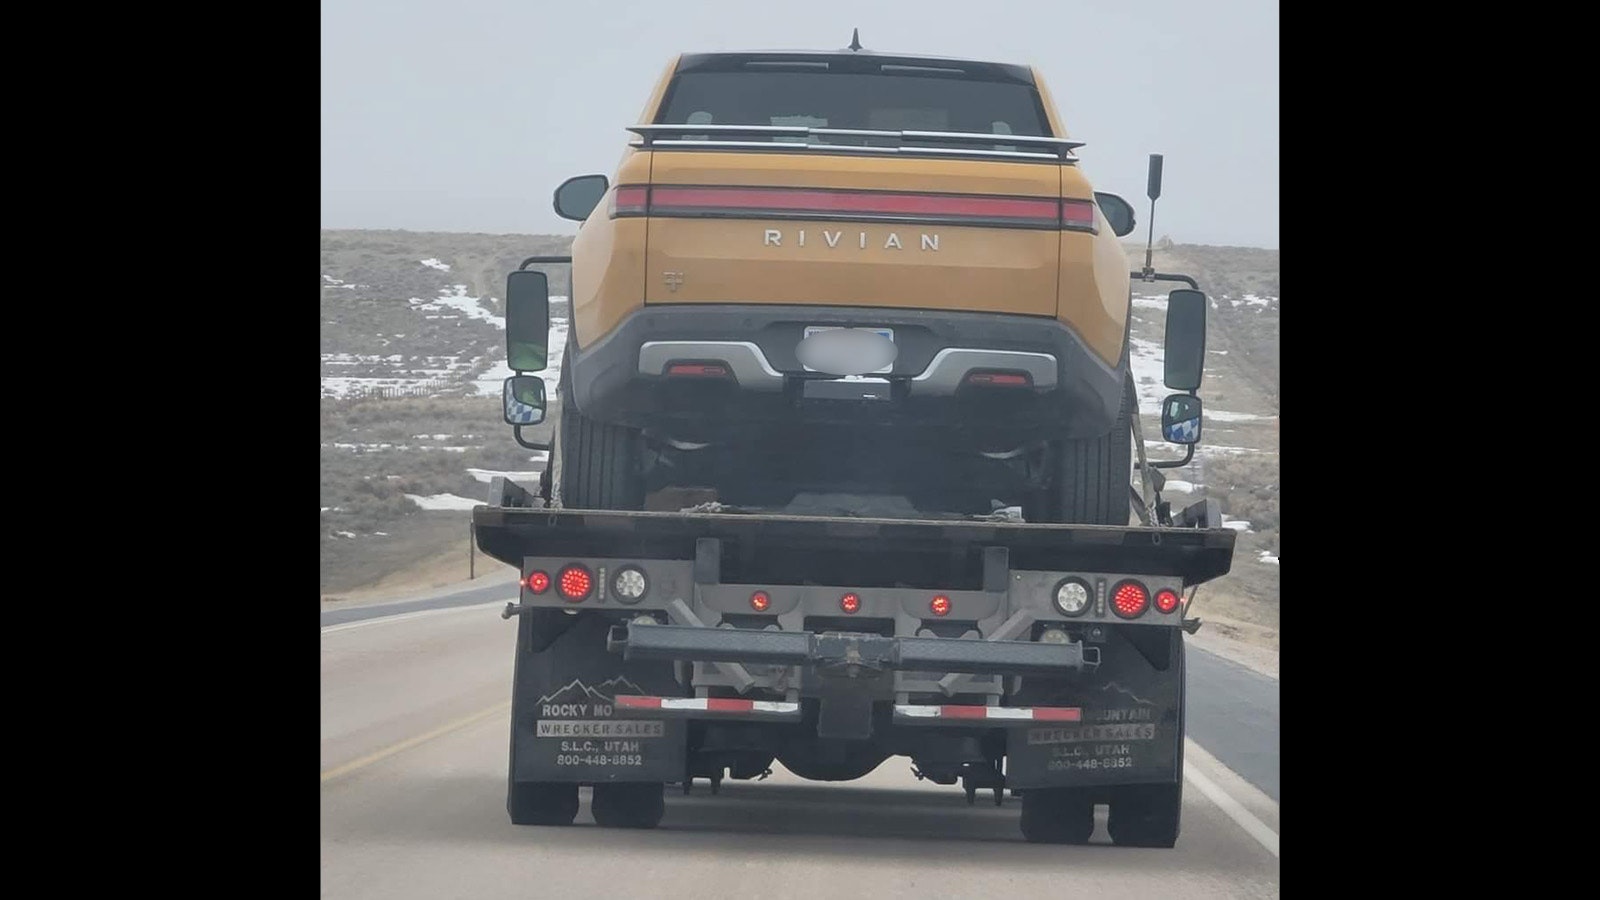 A tow truck takes a Rivian that was stranded while traveling between Riverton and Rock Springs on Friday.